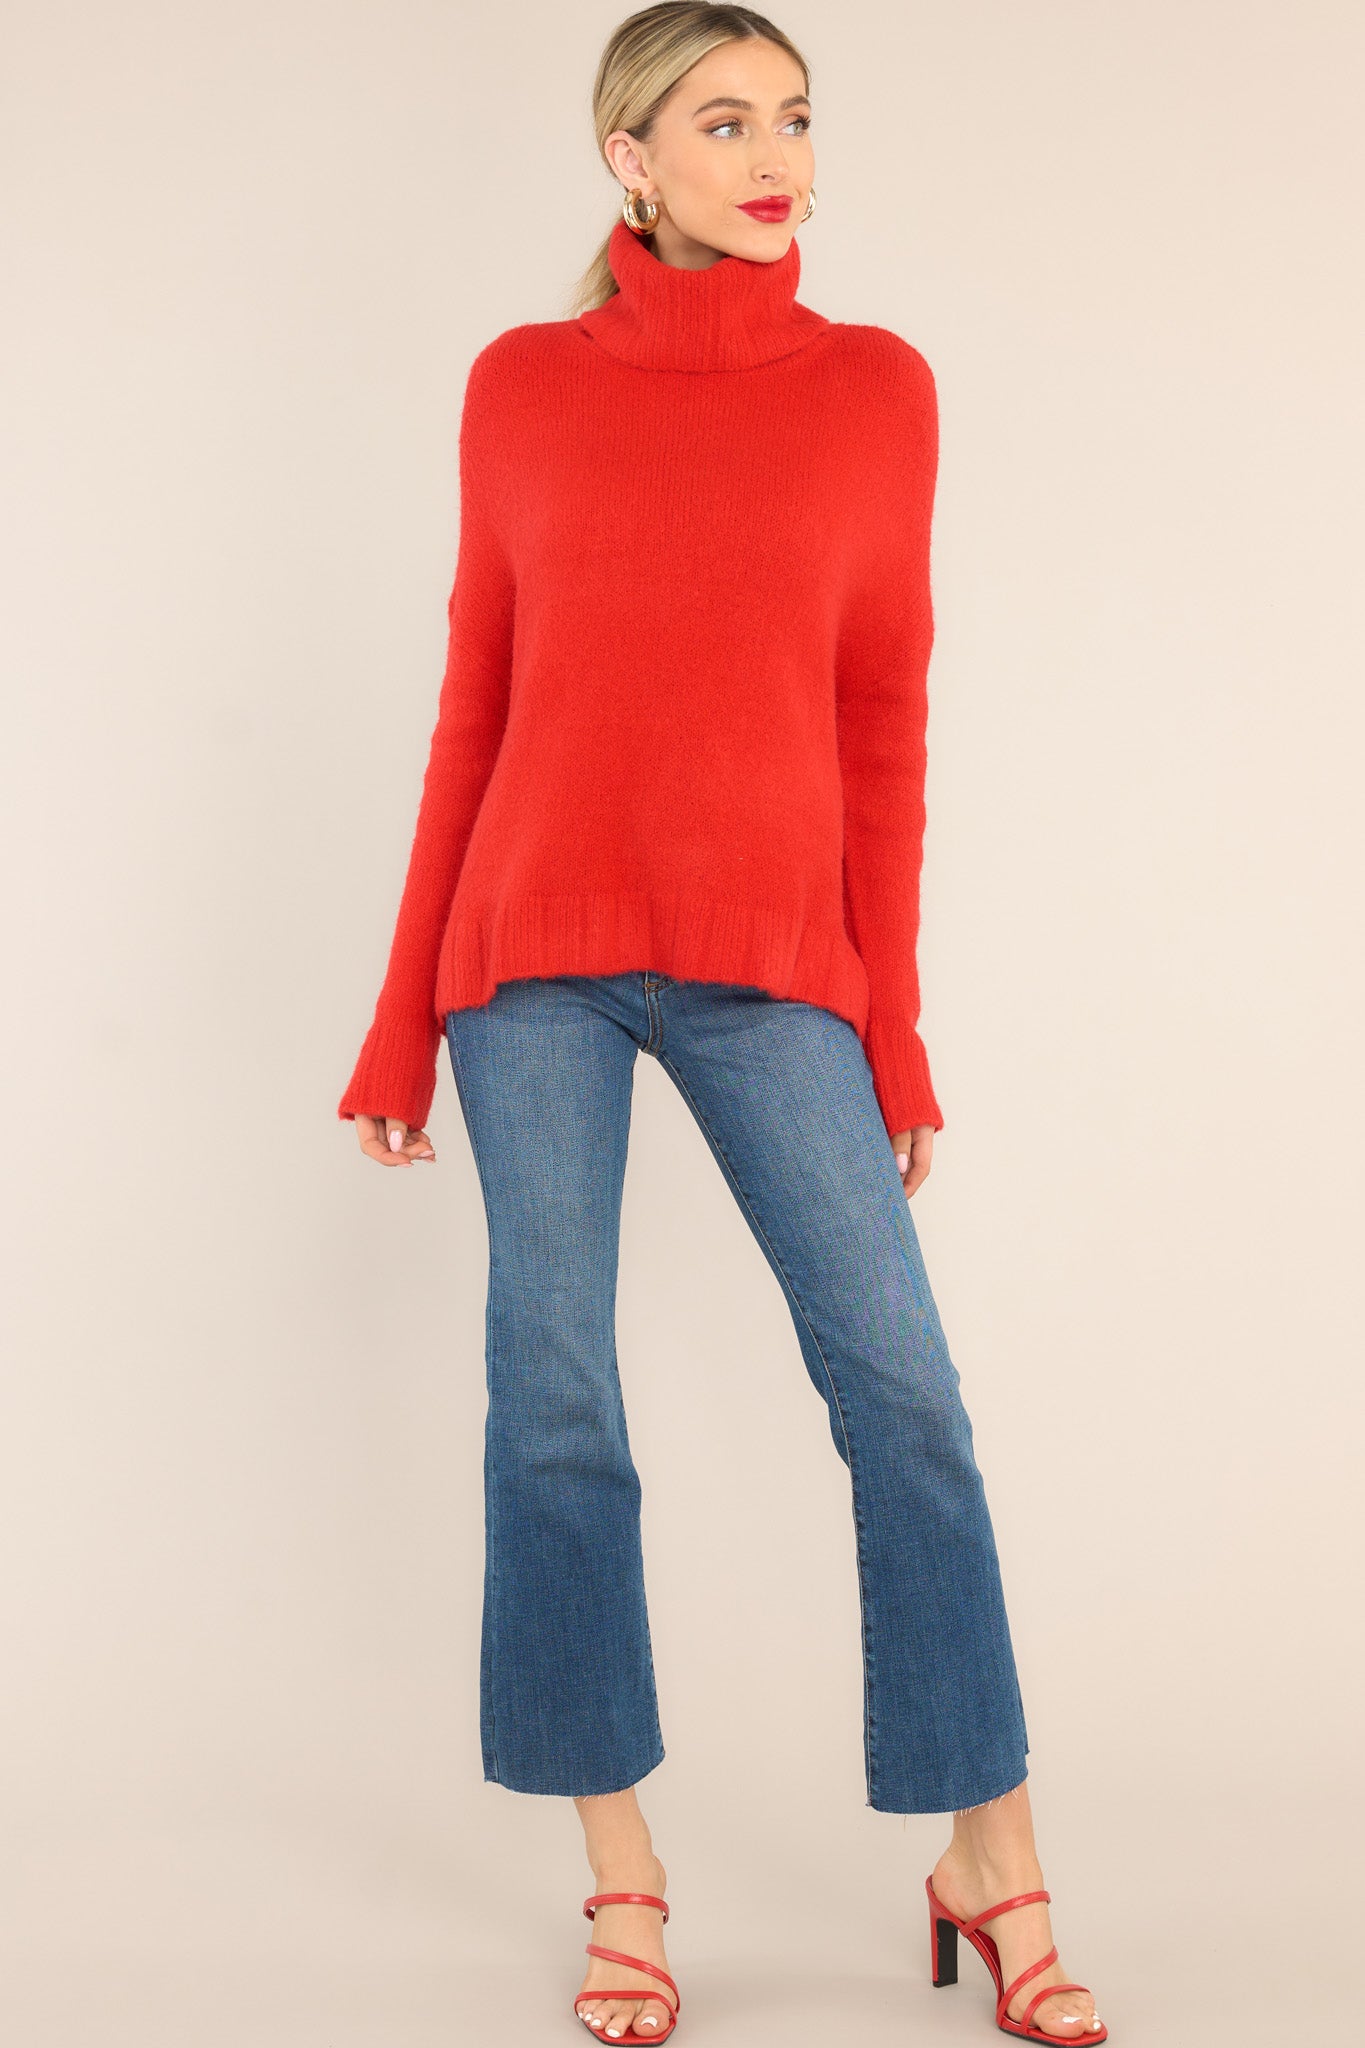 Beautiful Red Turtle Neck Sweater - All Tops